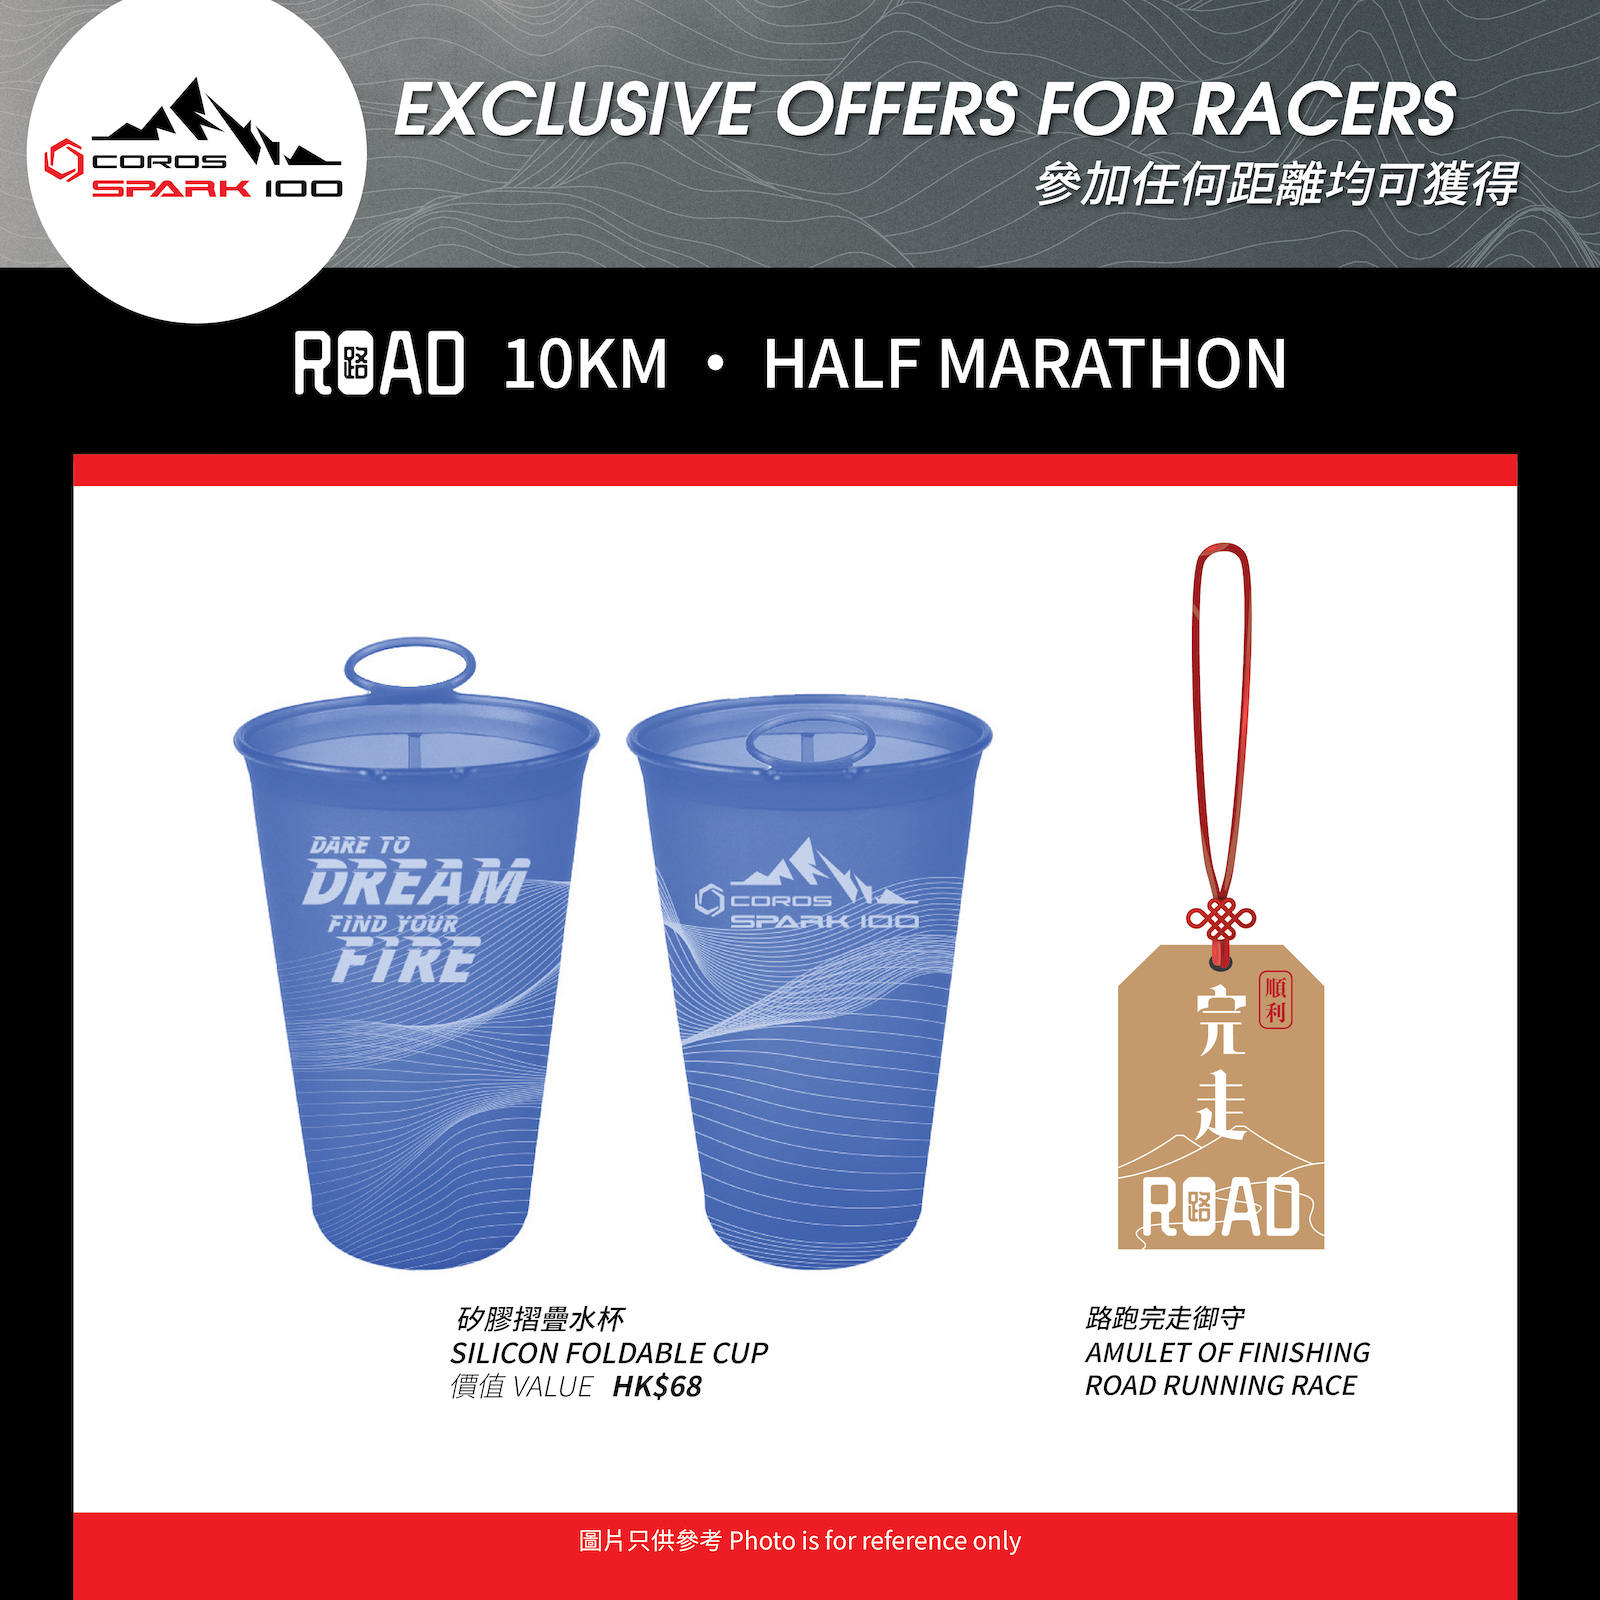 COROS SPARK 100 silicone foldable cup (Value: HK$68) & Amulet of road race finishing